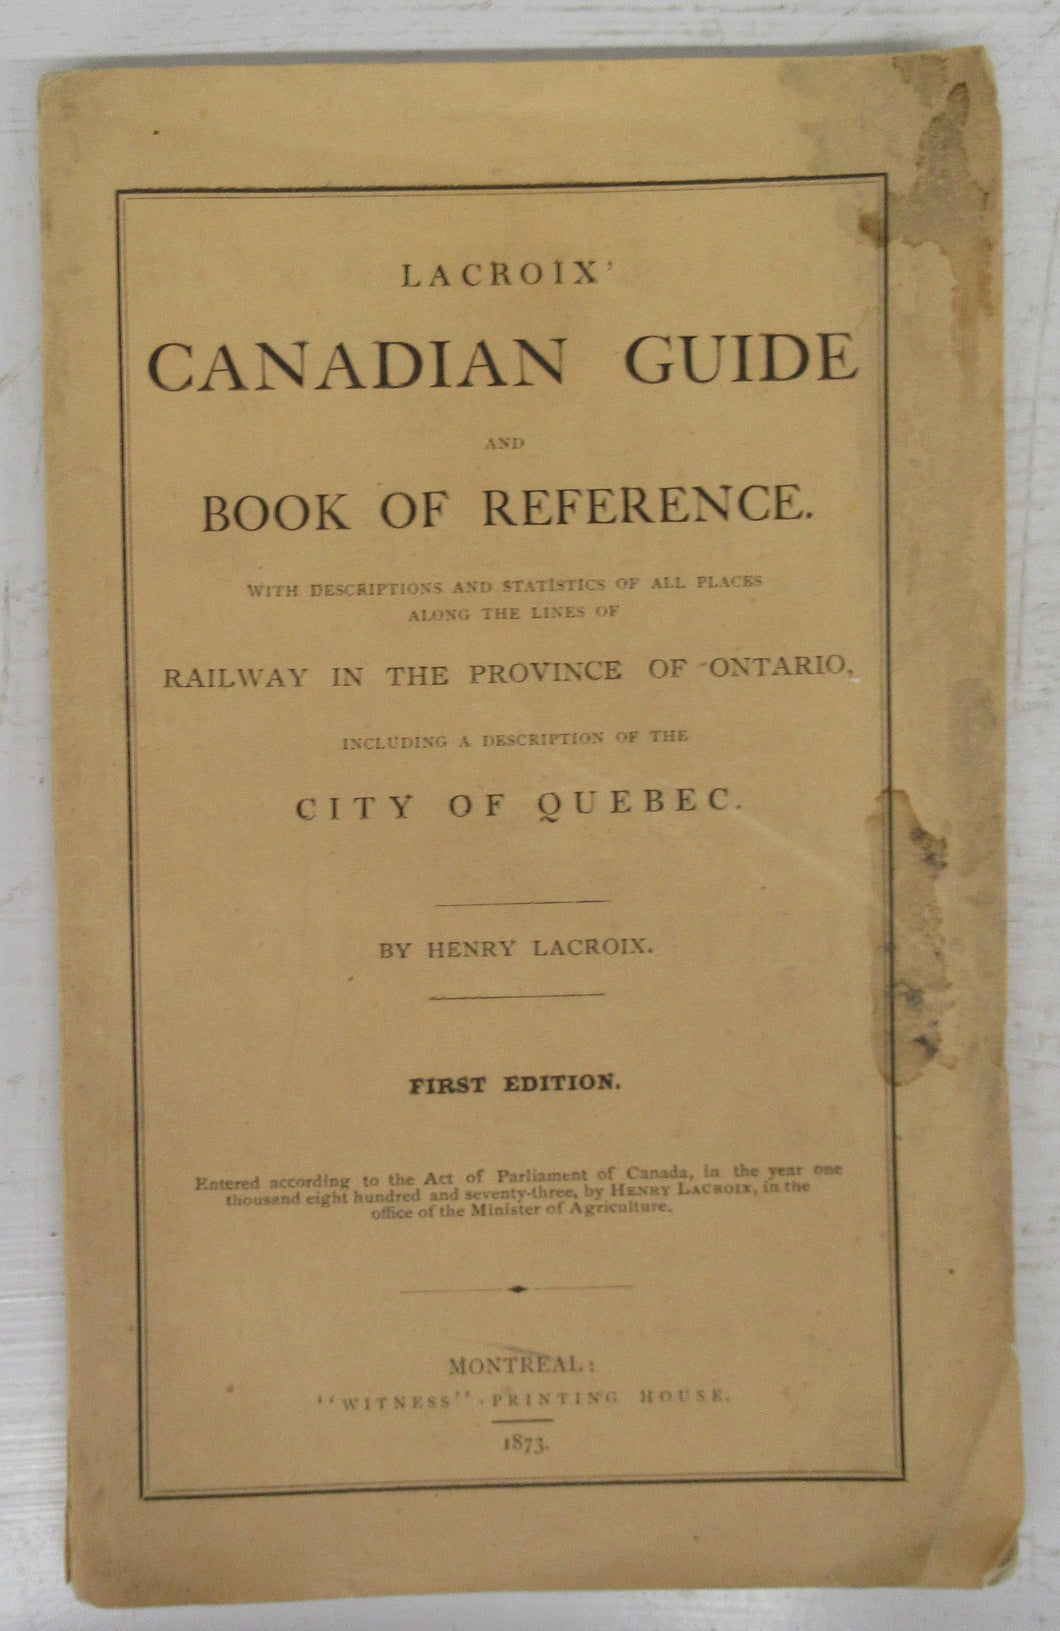 Lacroix' Canadian Guide and Book of Reference. With Descriptions and Statistics of all Places along the Lines of Railway in the Province of Ontario